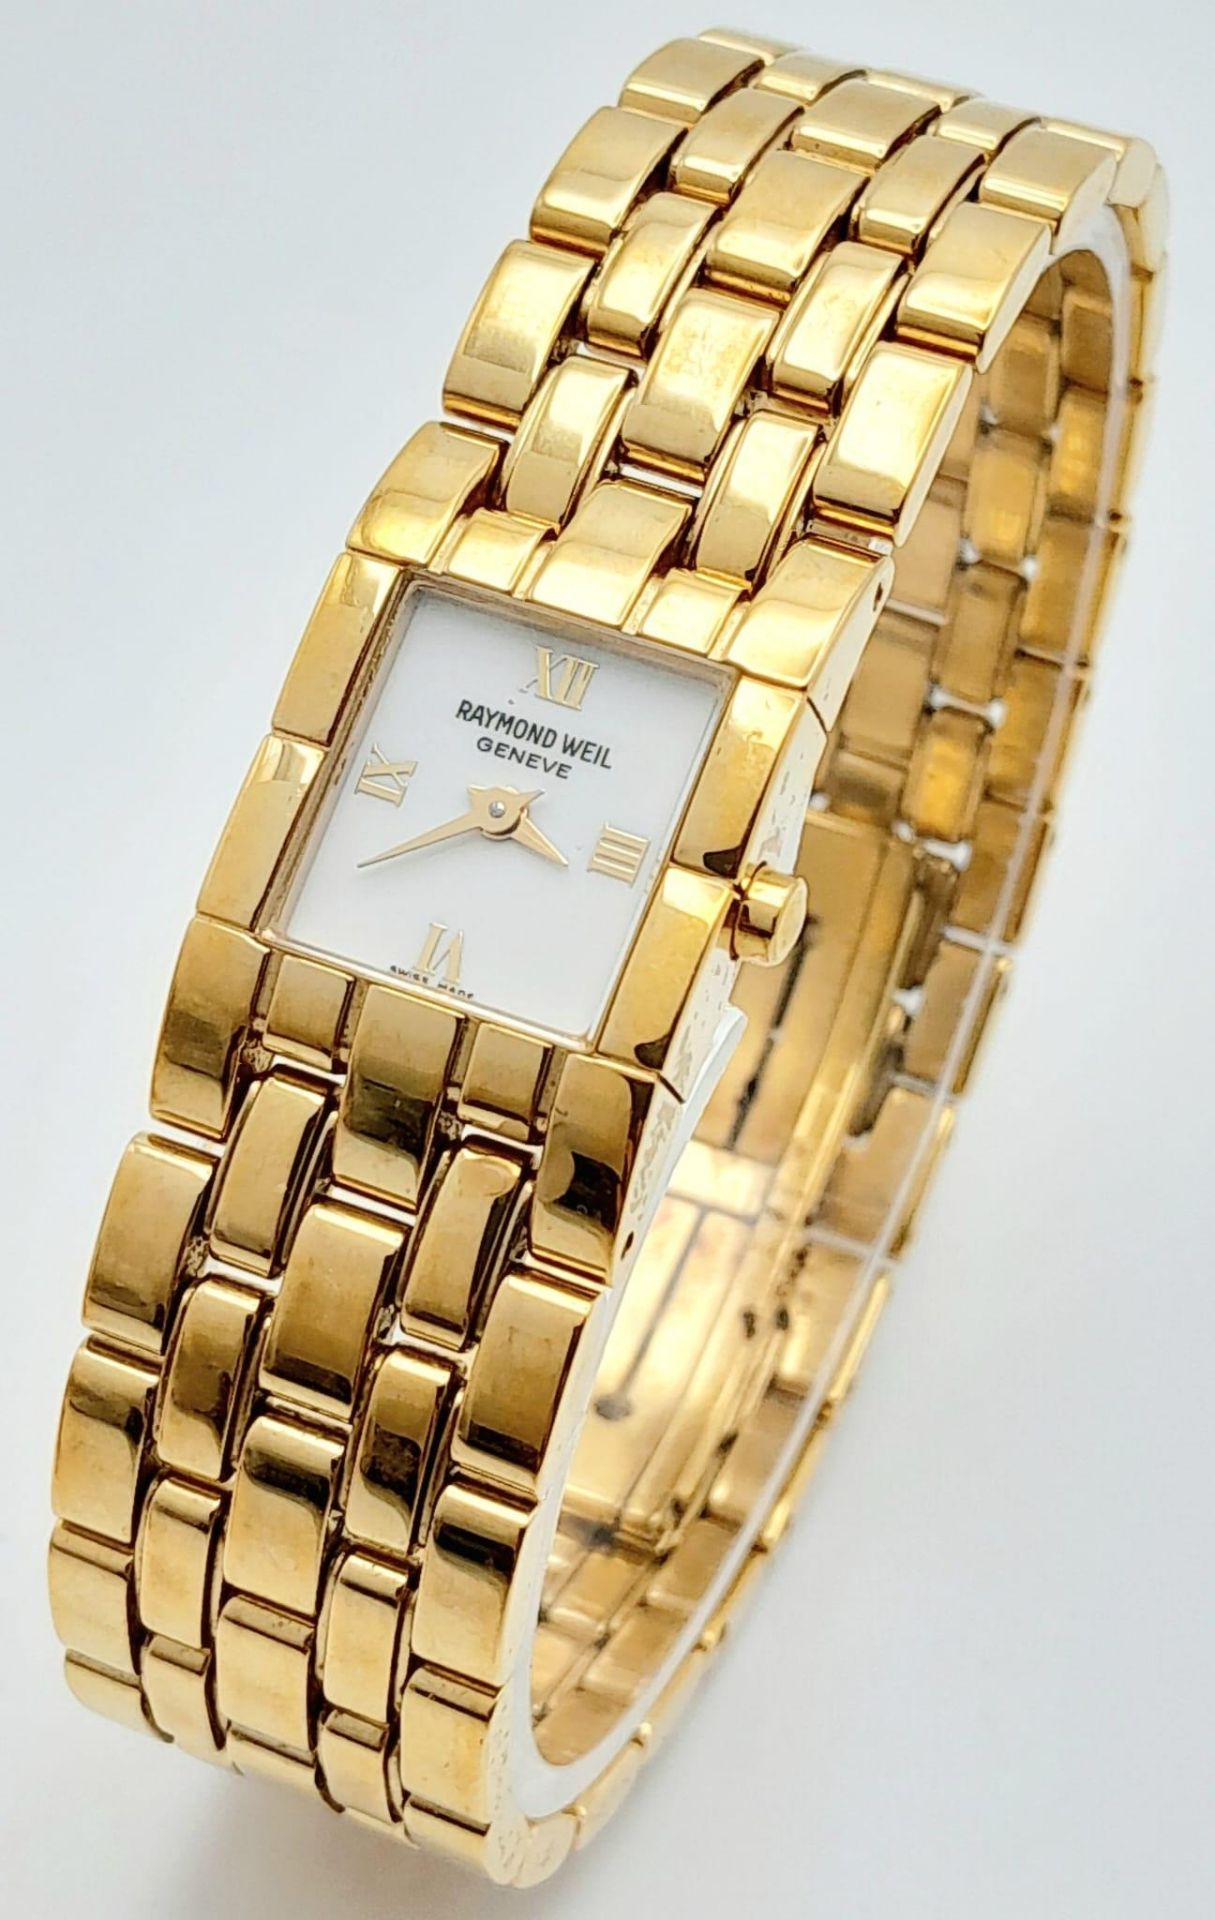 A Beautiful Gold Plated Raymond Weil Ladies Cocktail Watch. Gold plated bracelet and case - 17mm.